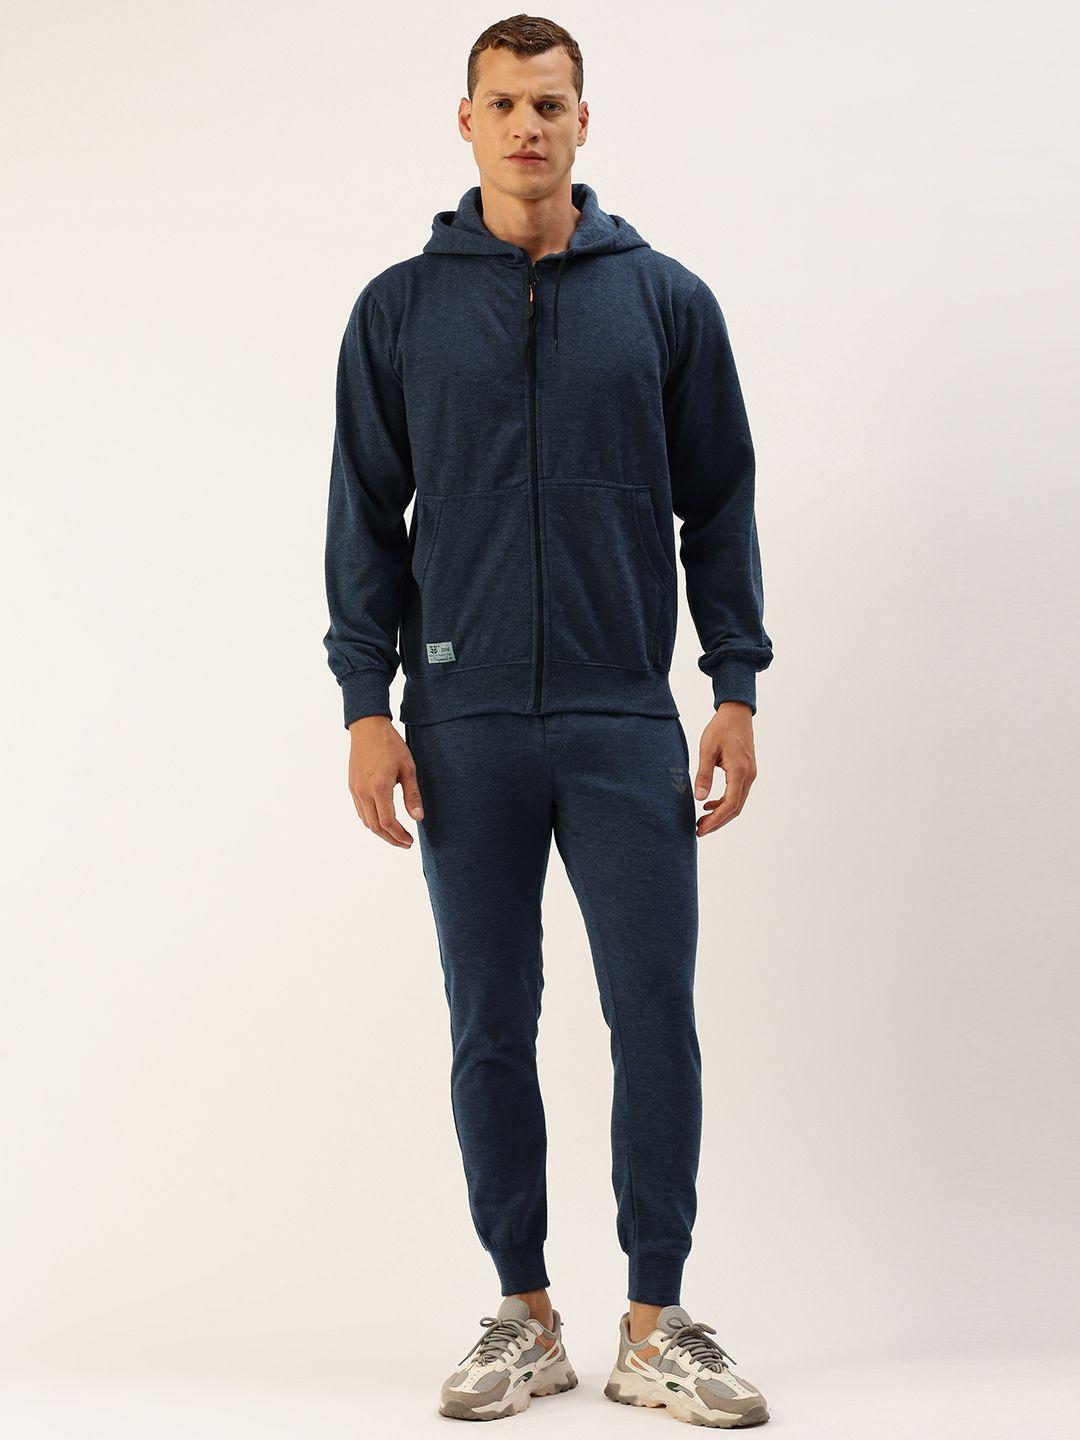 sports52 wear solid hooded jacket with joggers